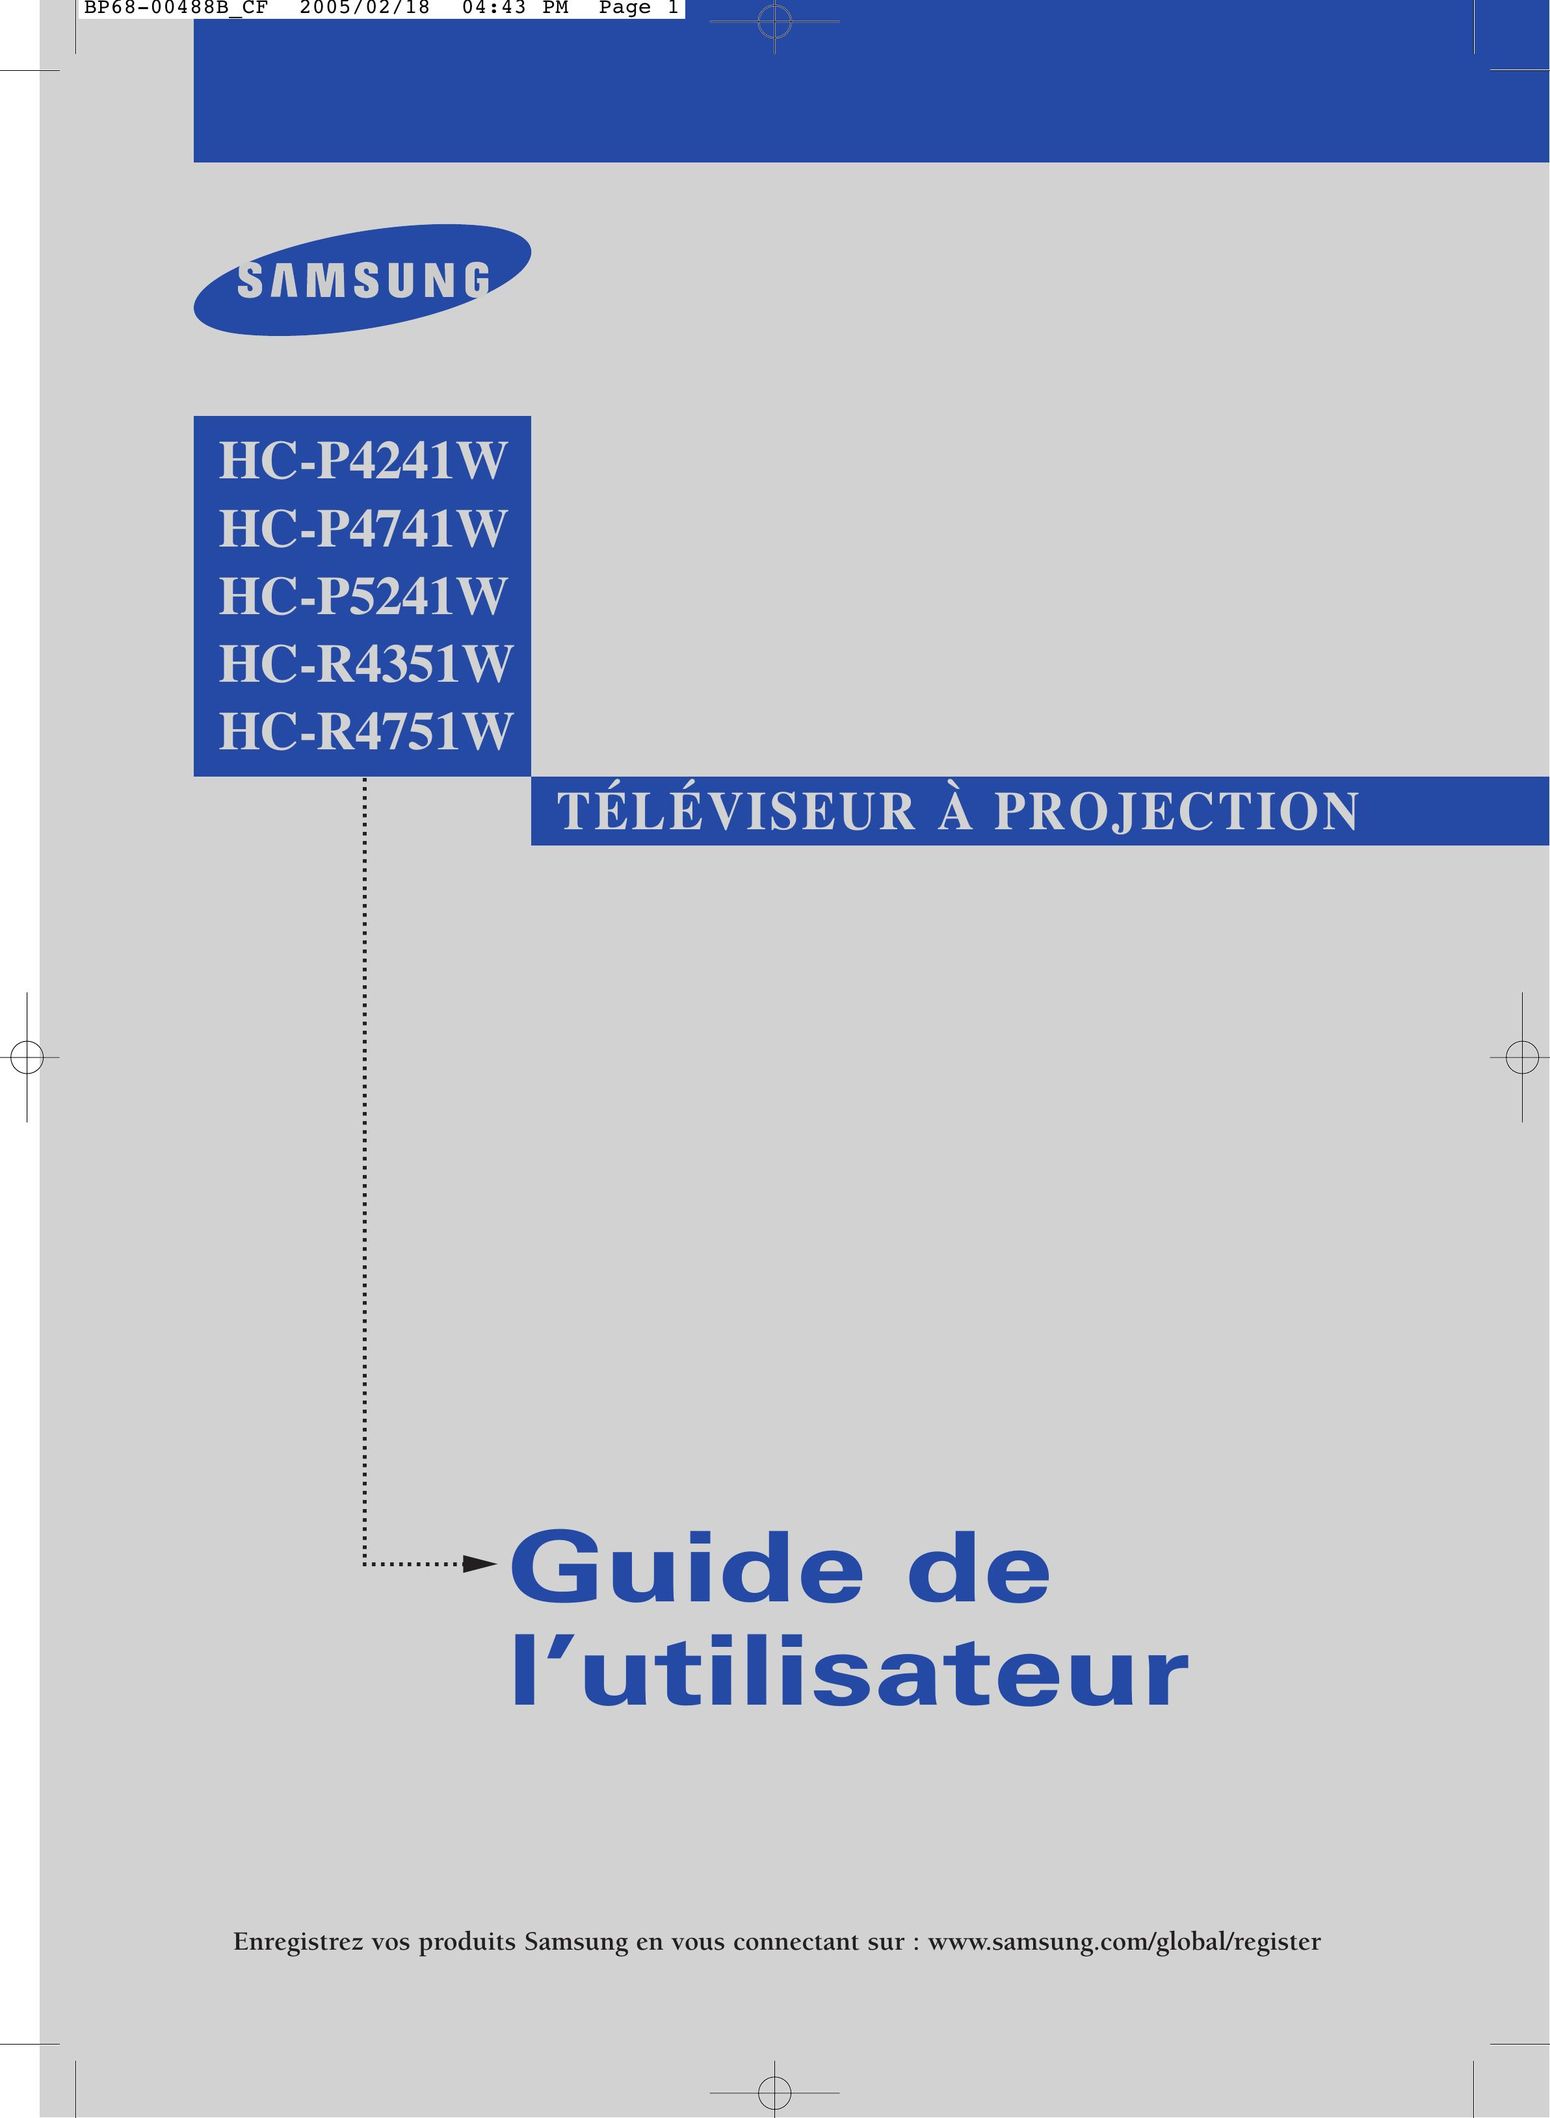 Samsung HC P4741W Projection Television User Manual